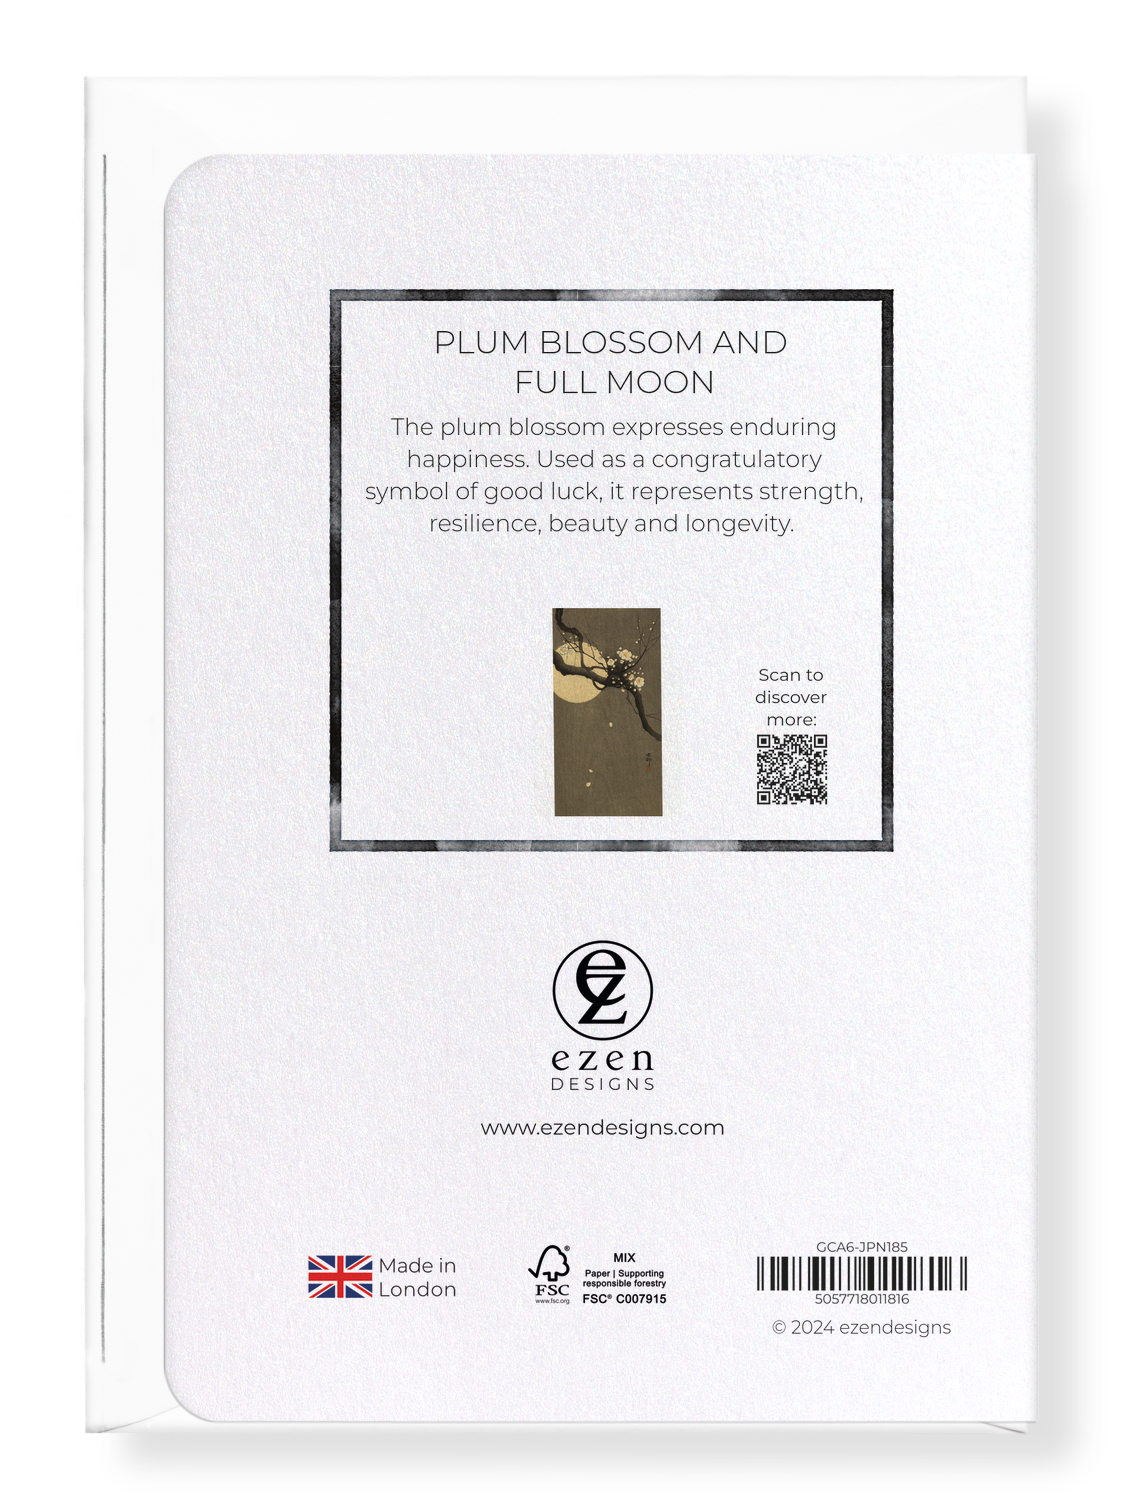 Ezen Designs - Plum blossom and full moon - Greeting Card - Back